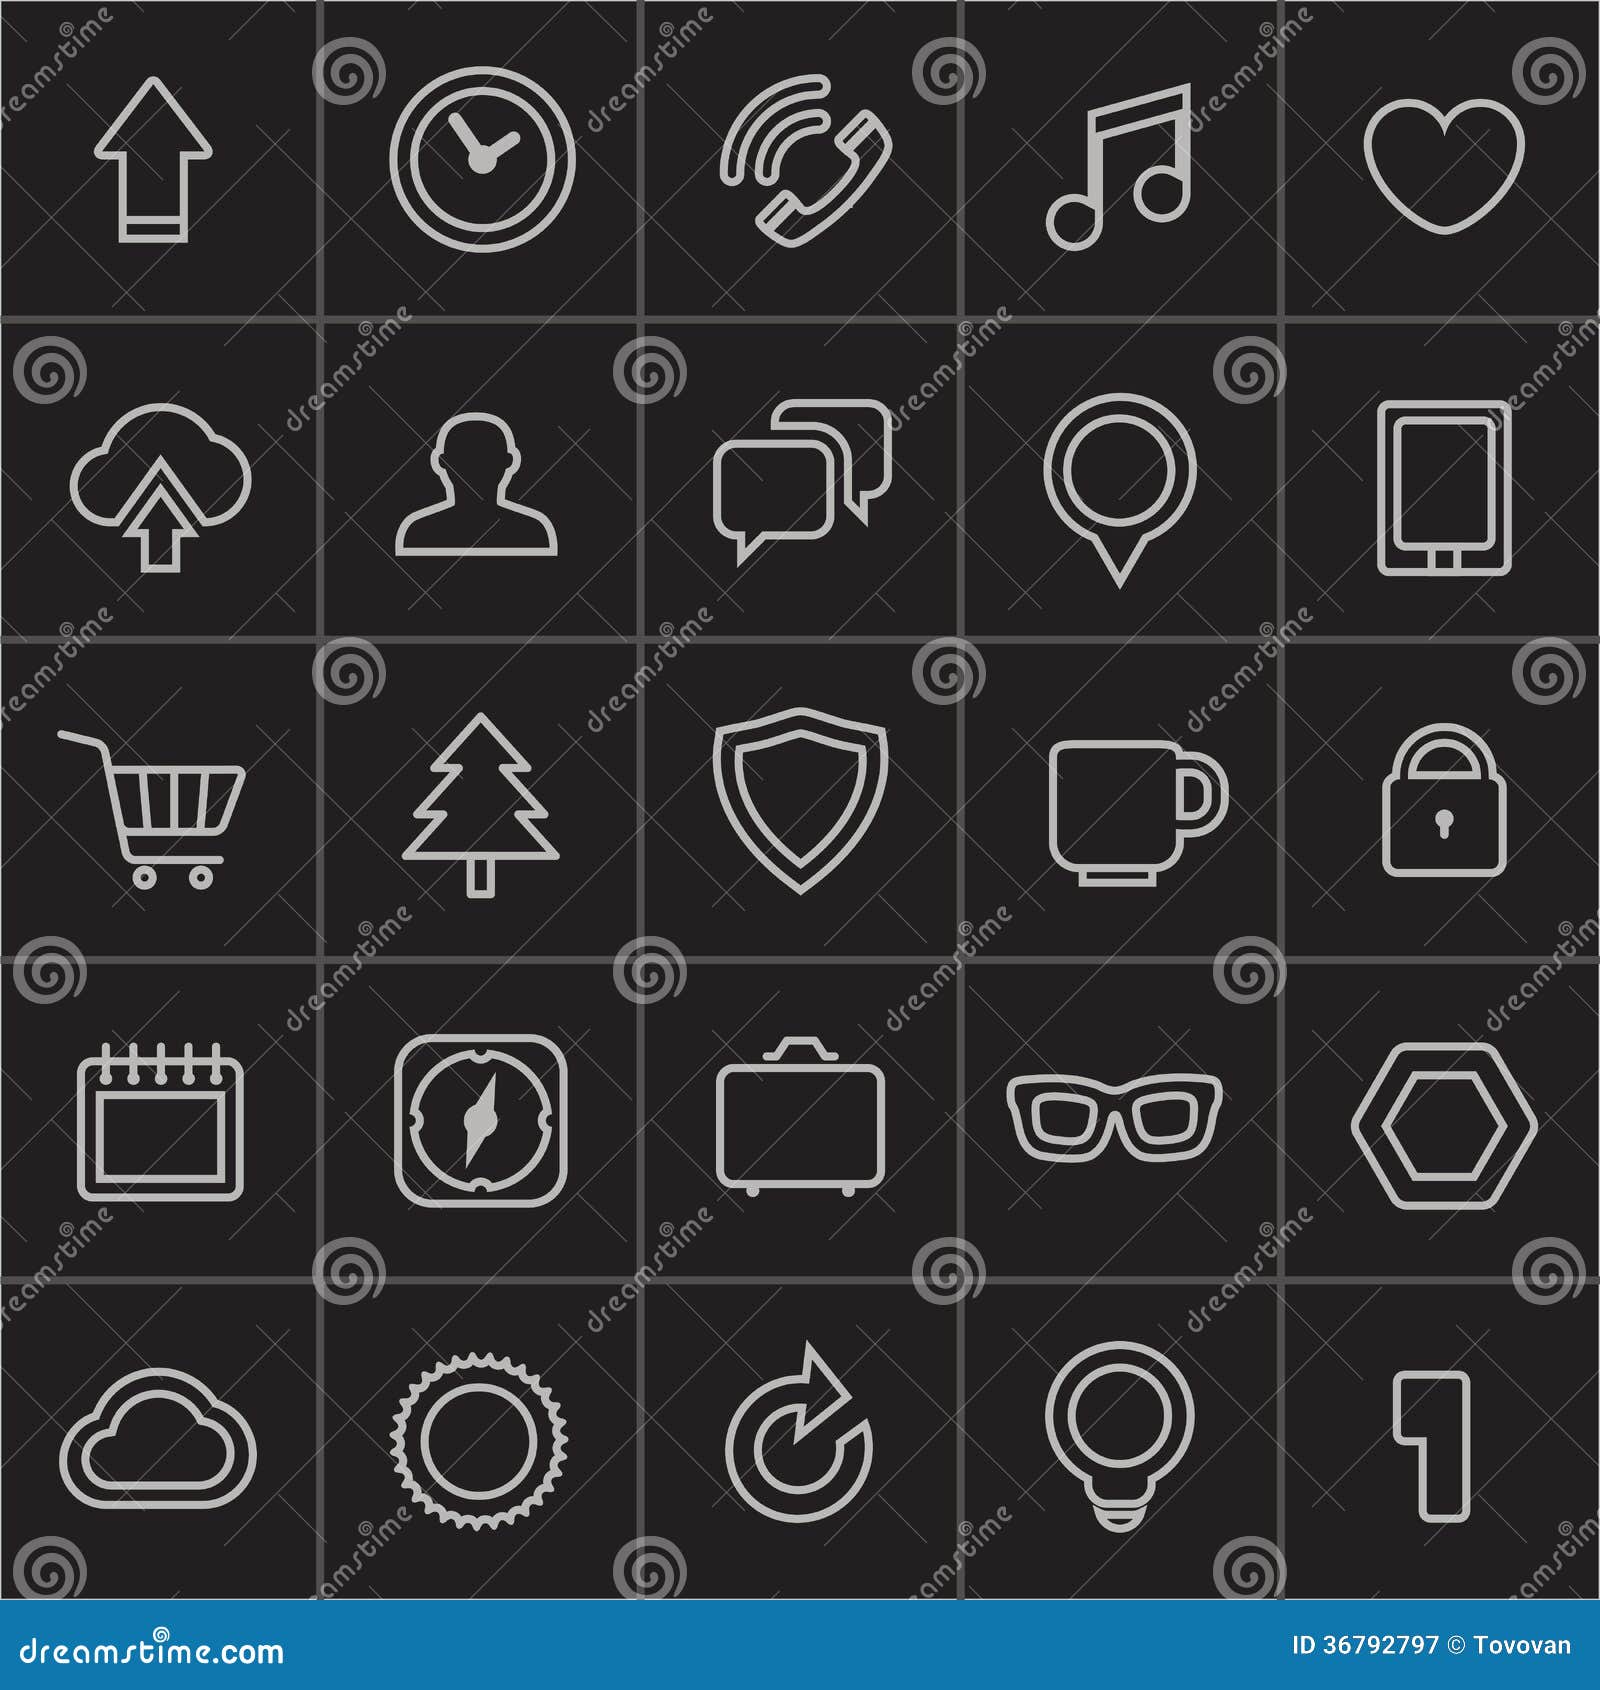 Modern Web Icons Collection Stock Vector - Illustration of phone, bulb ...